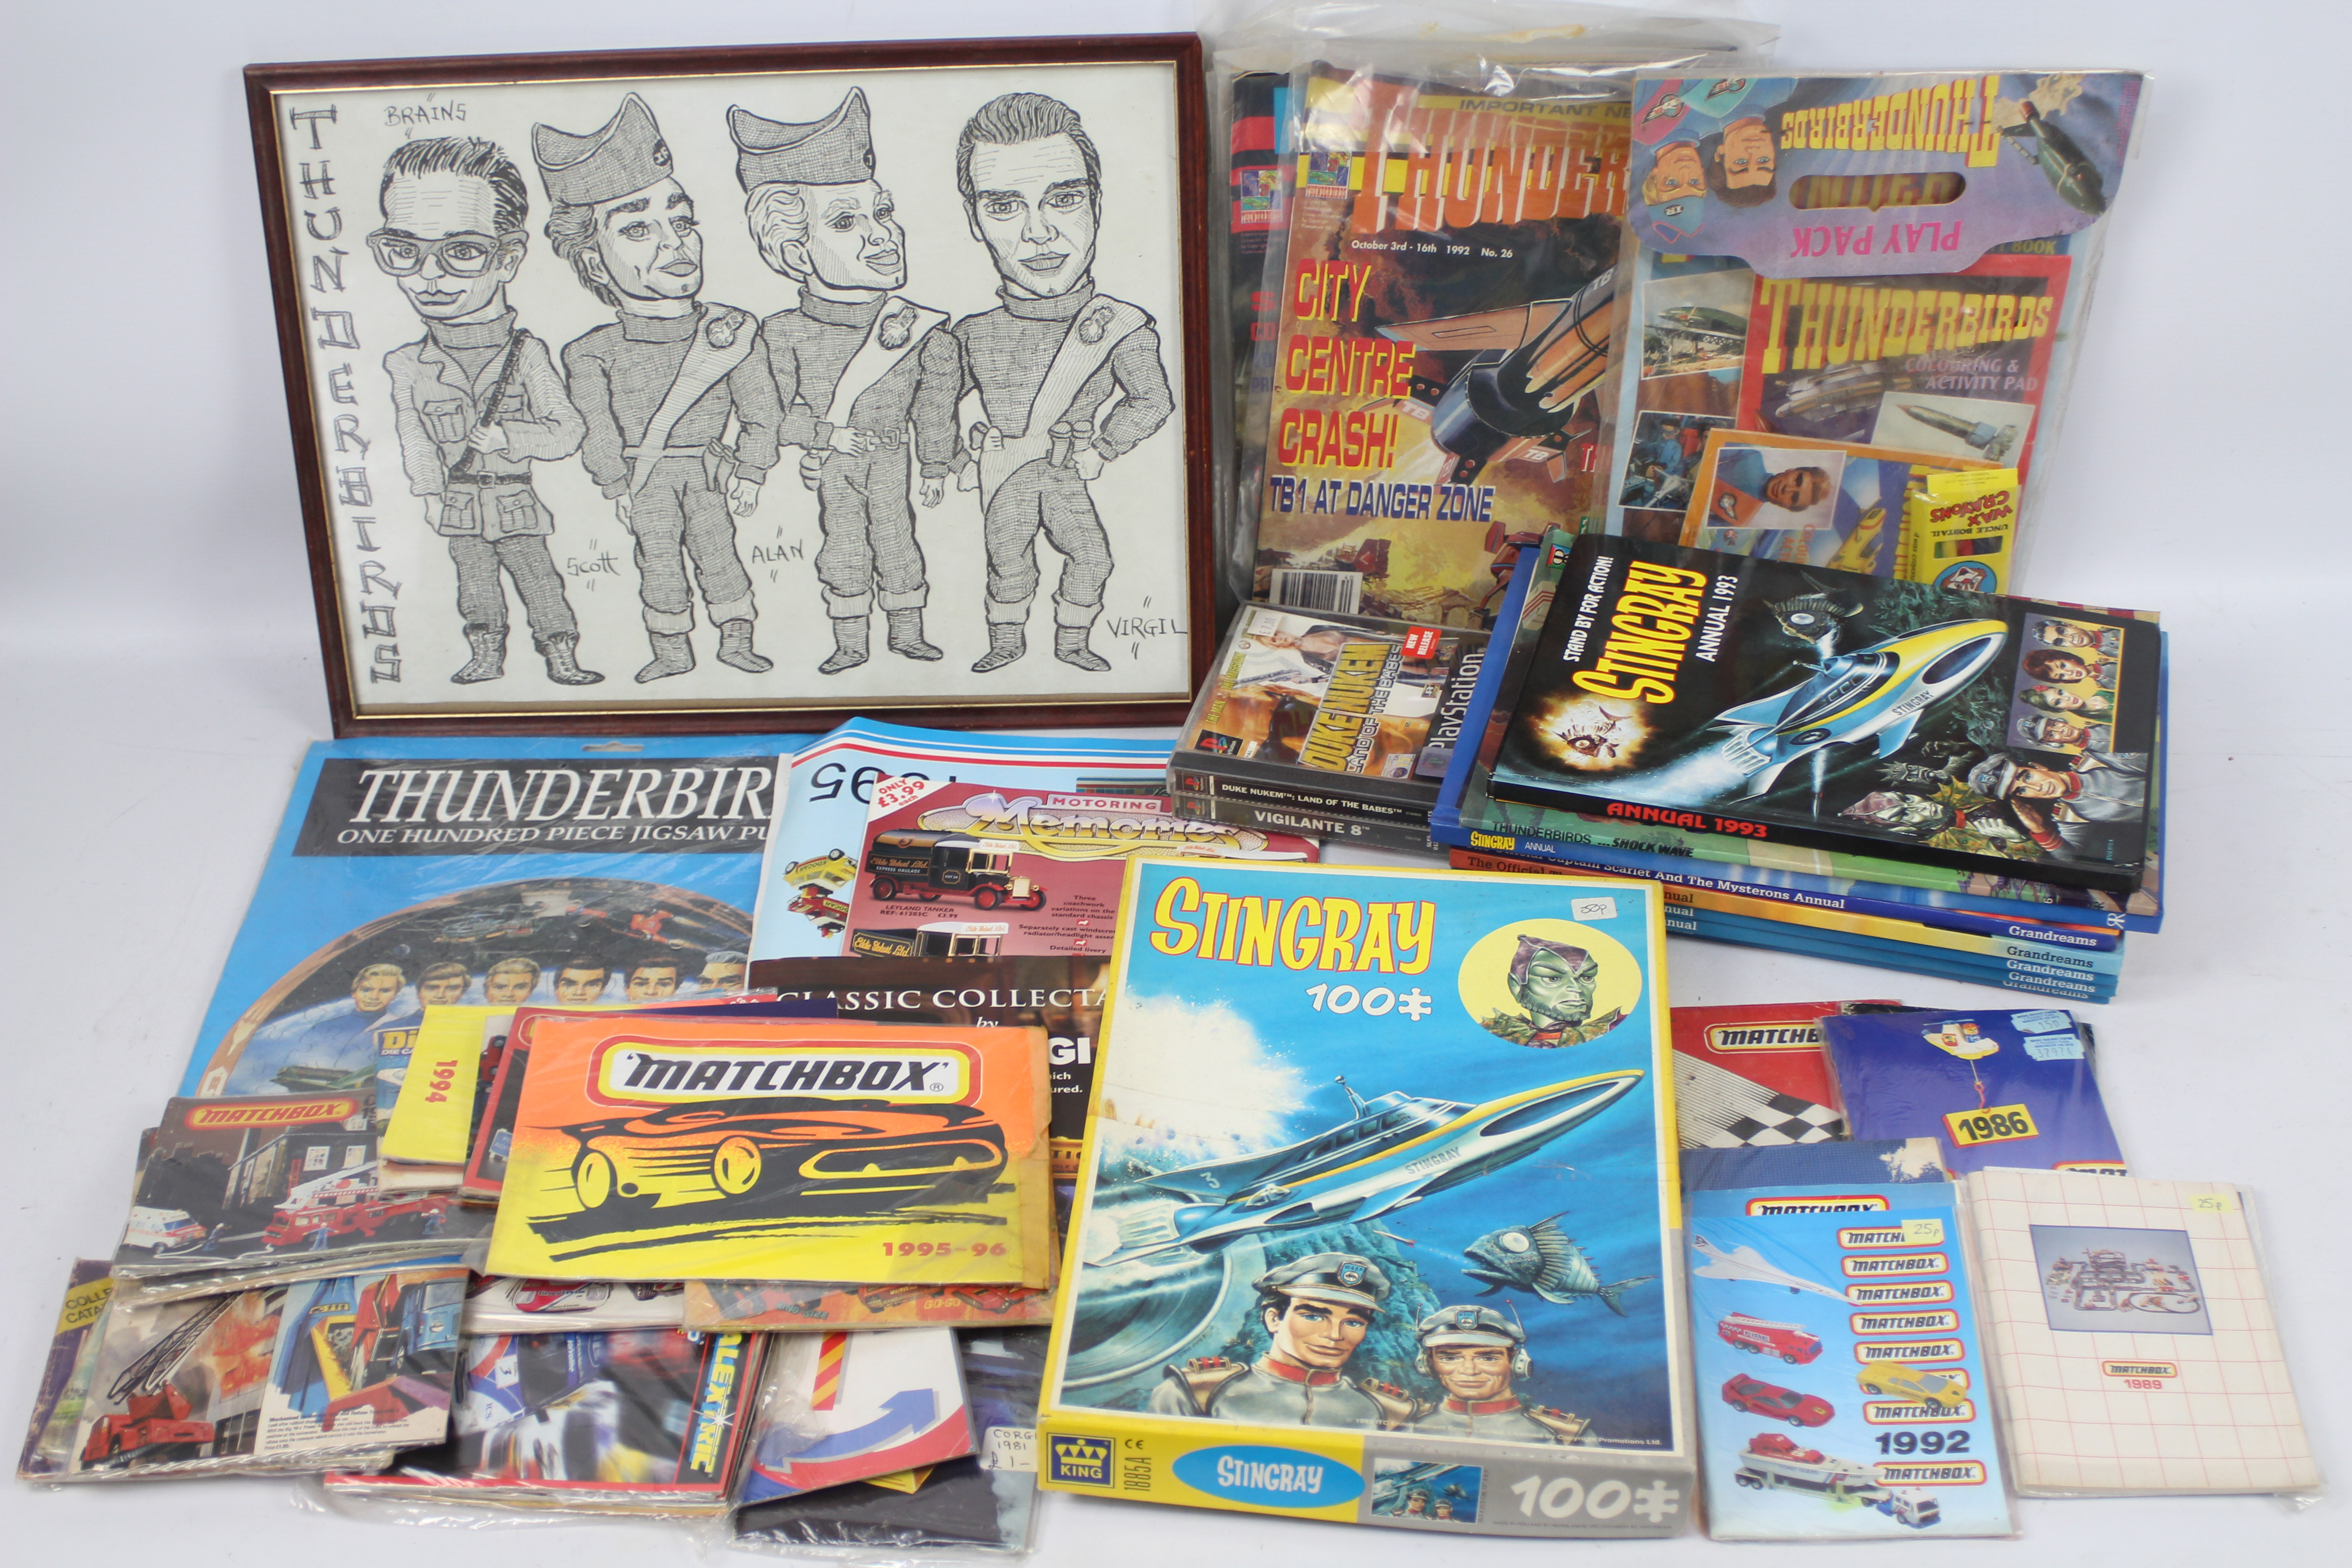 Thunderbirds - Stingray - Matchbox. A collection of Thunderbirds Annuals, comics and art.